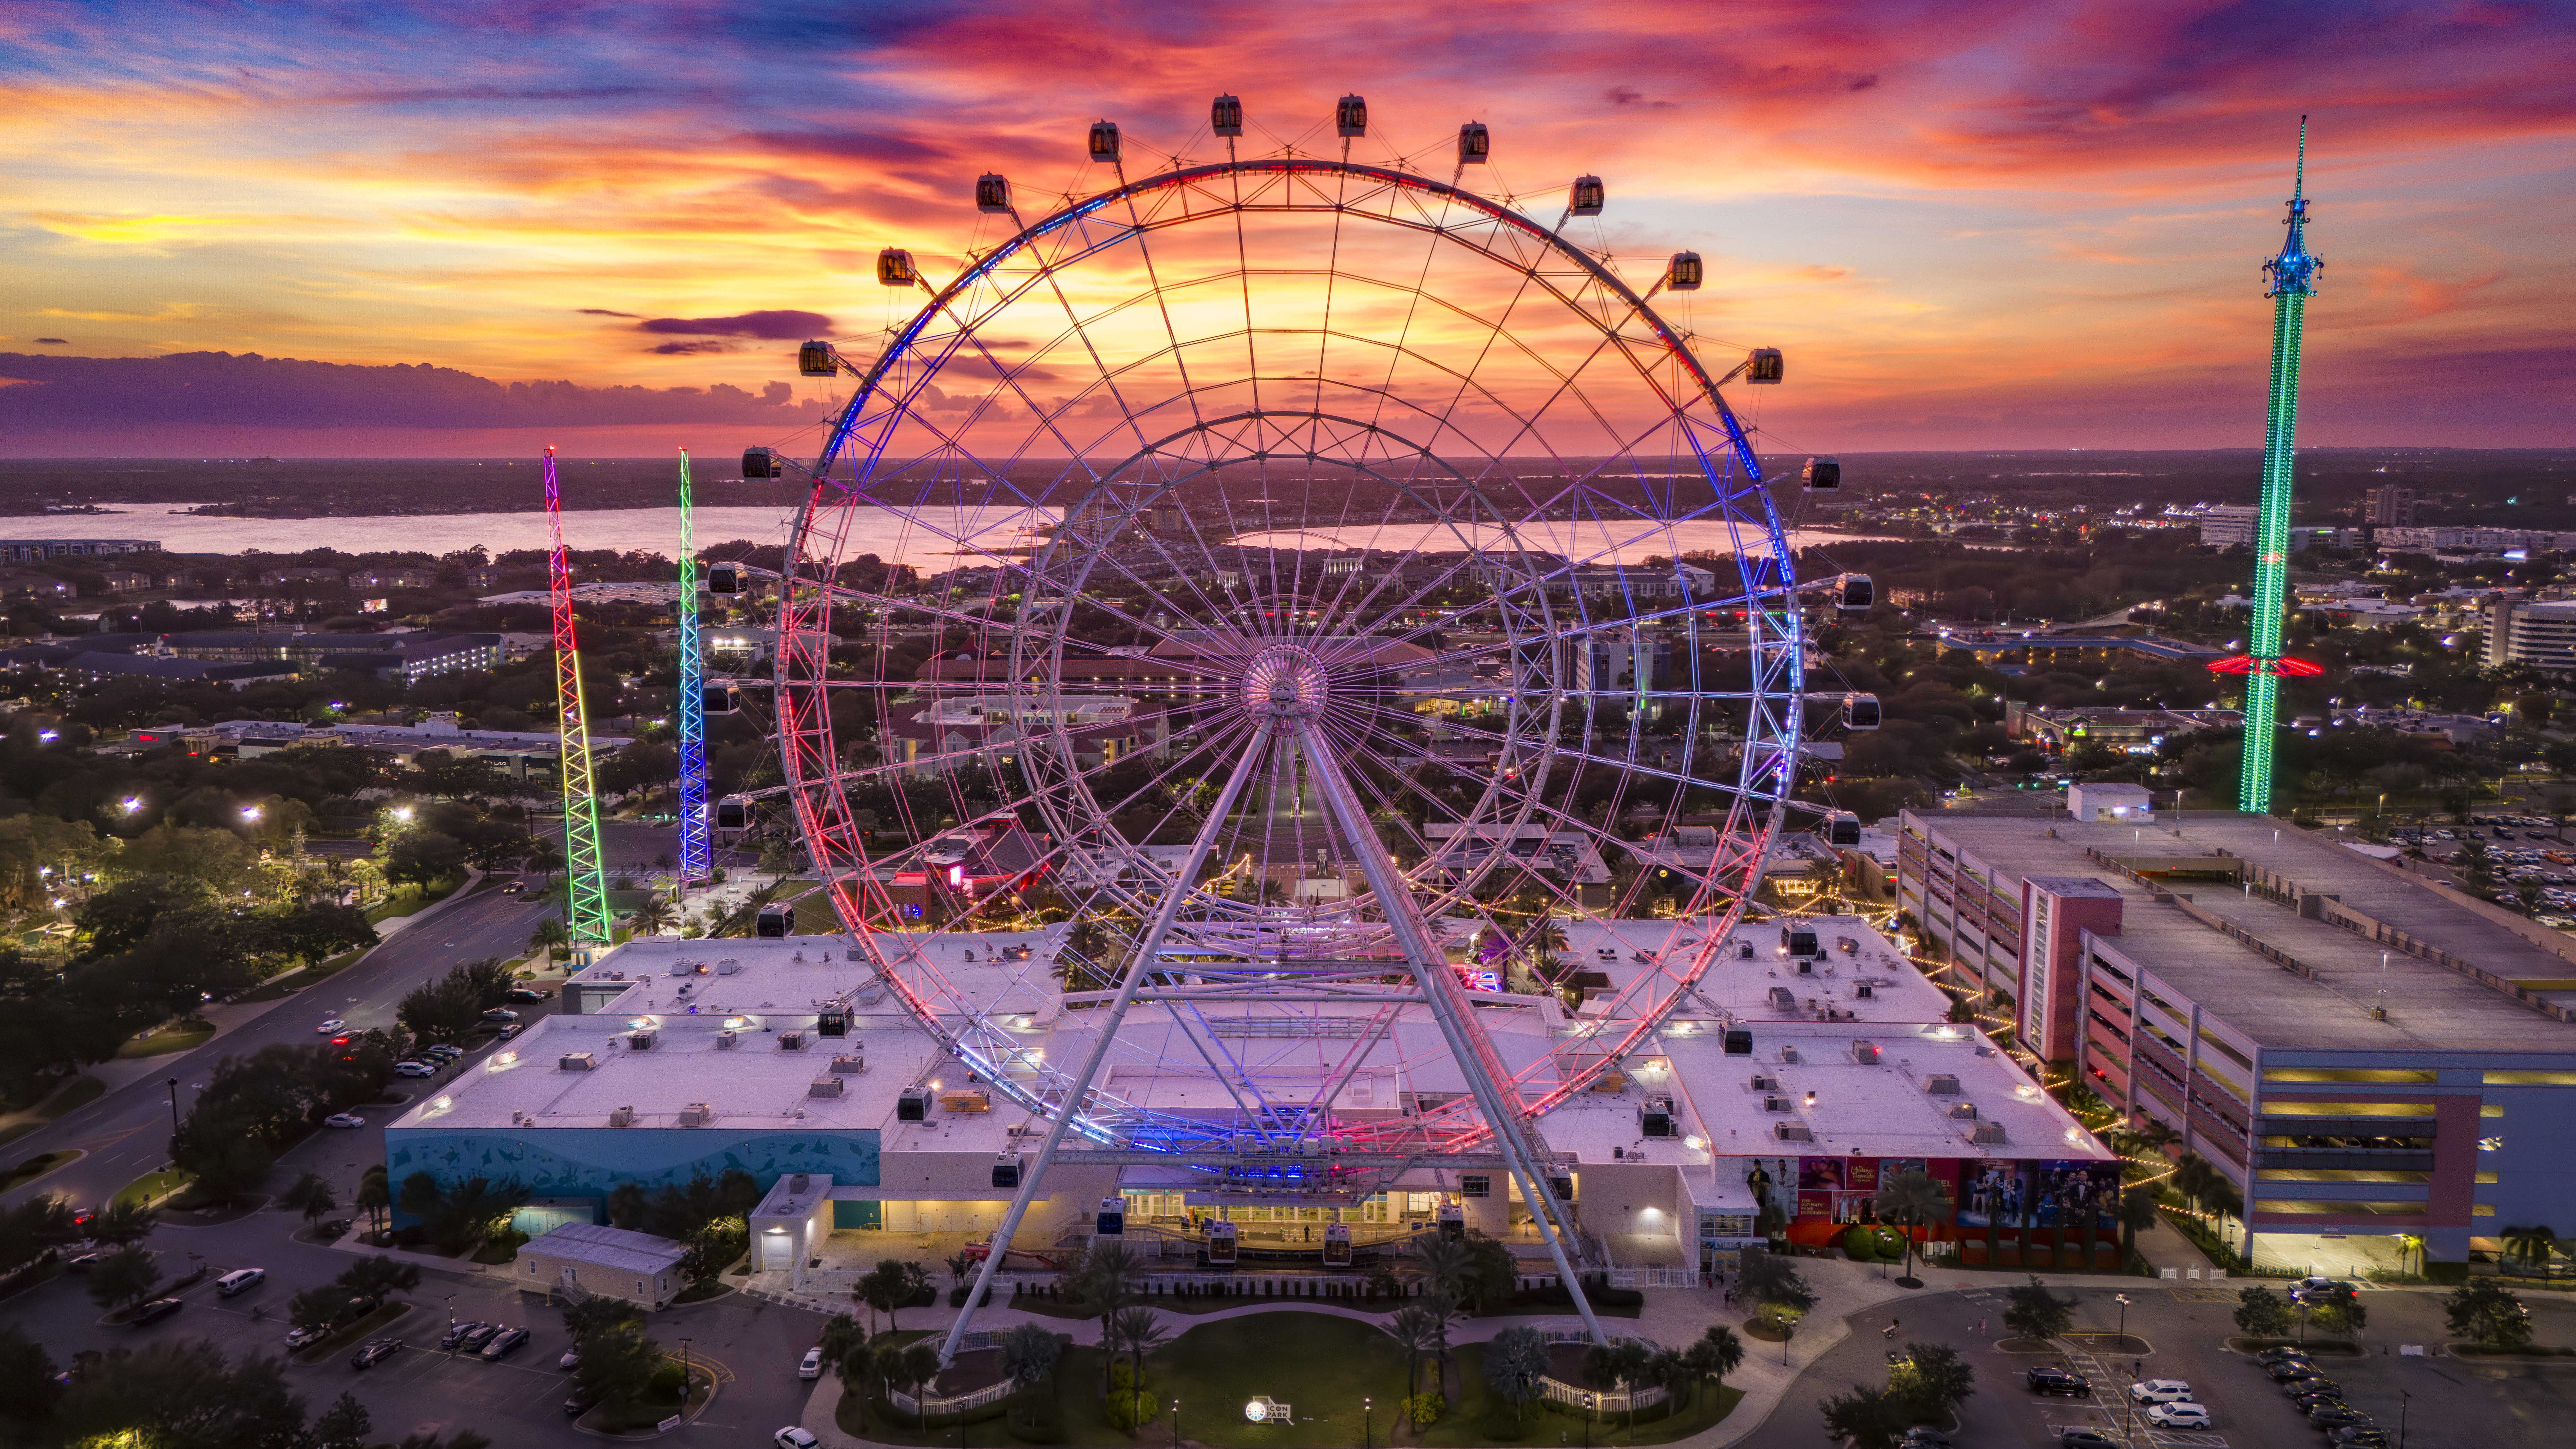 View of the entirety of The Orlando Eye during dusk with additional Icon Park attractions also shown. 